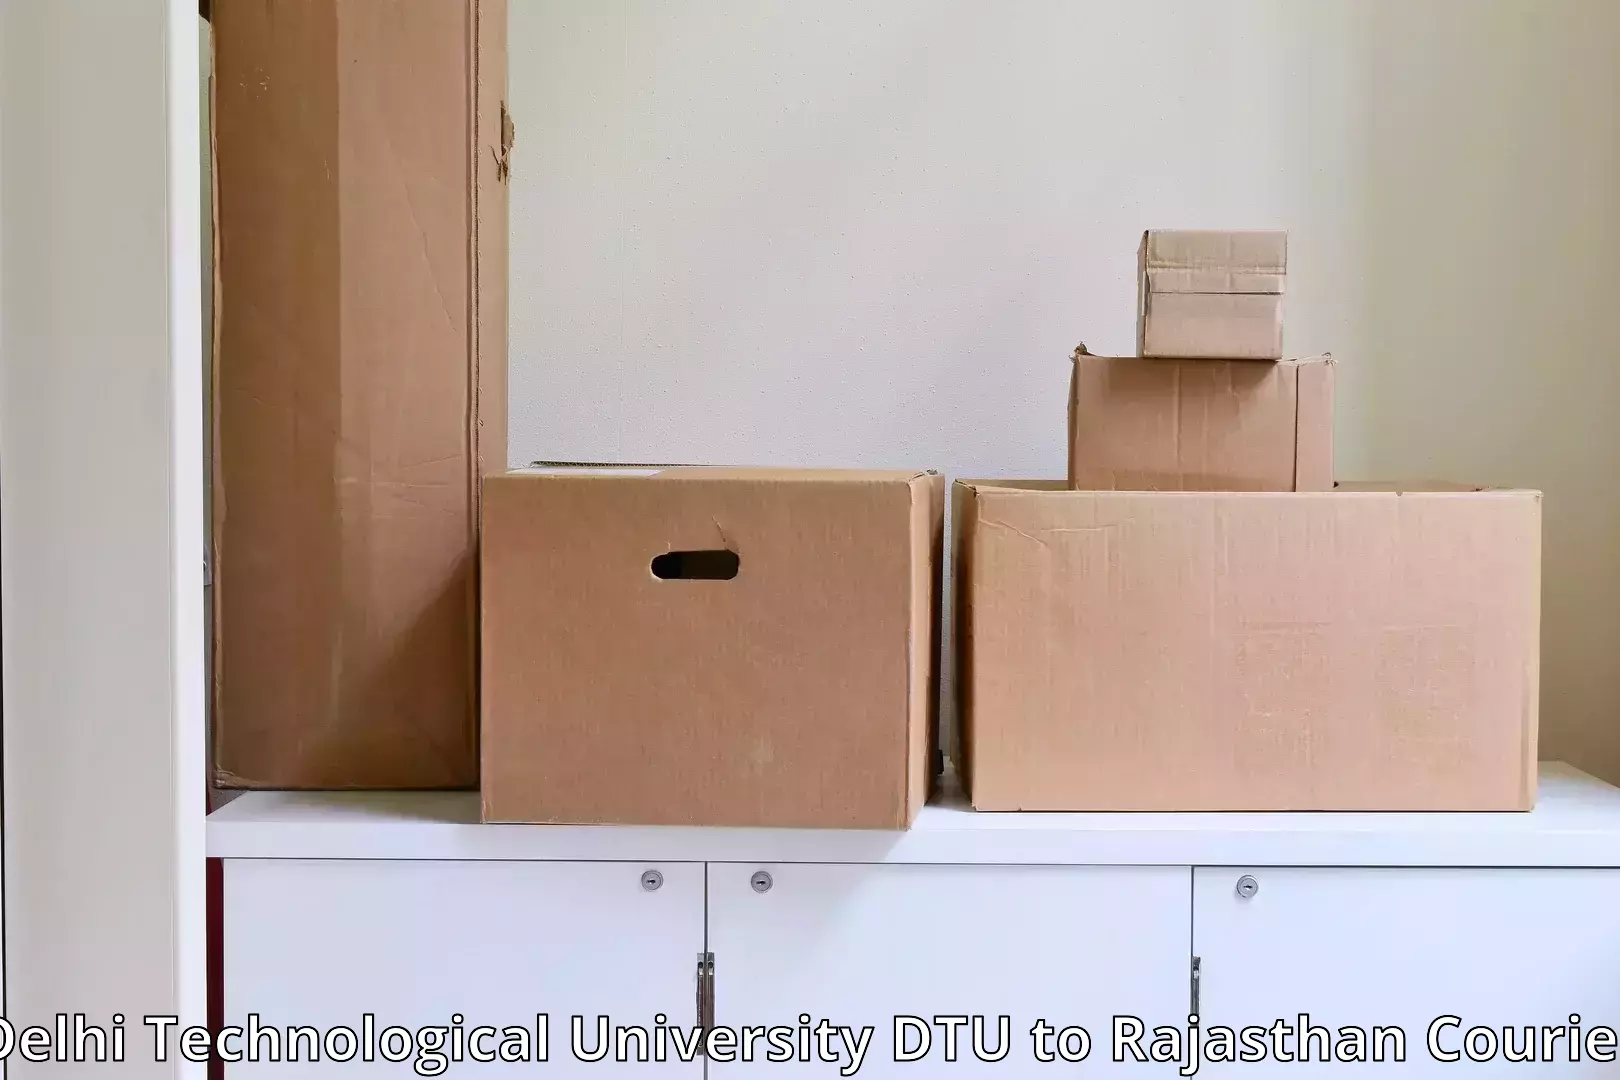 Quality moving company Delhi Technological University DTU to Rajasthan